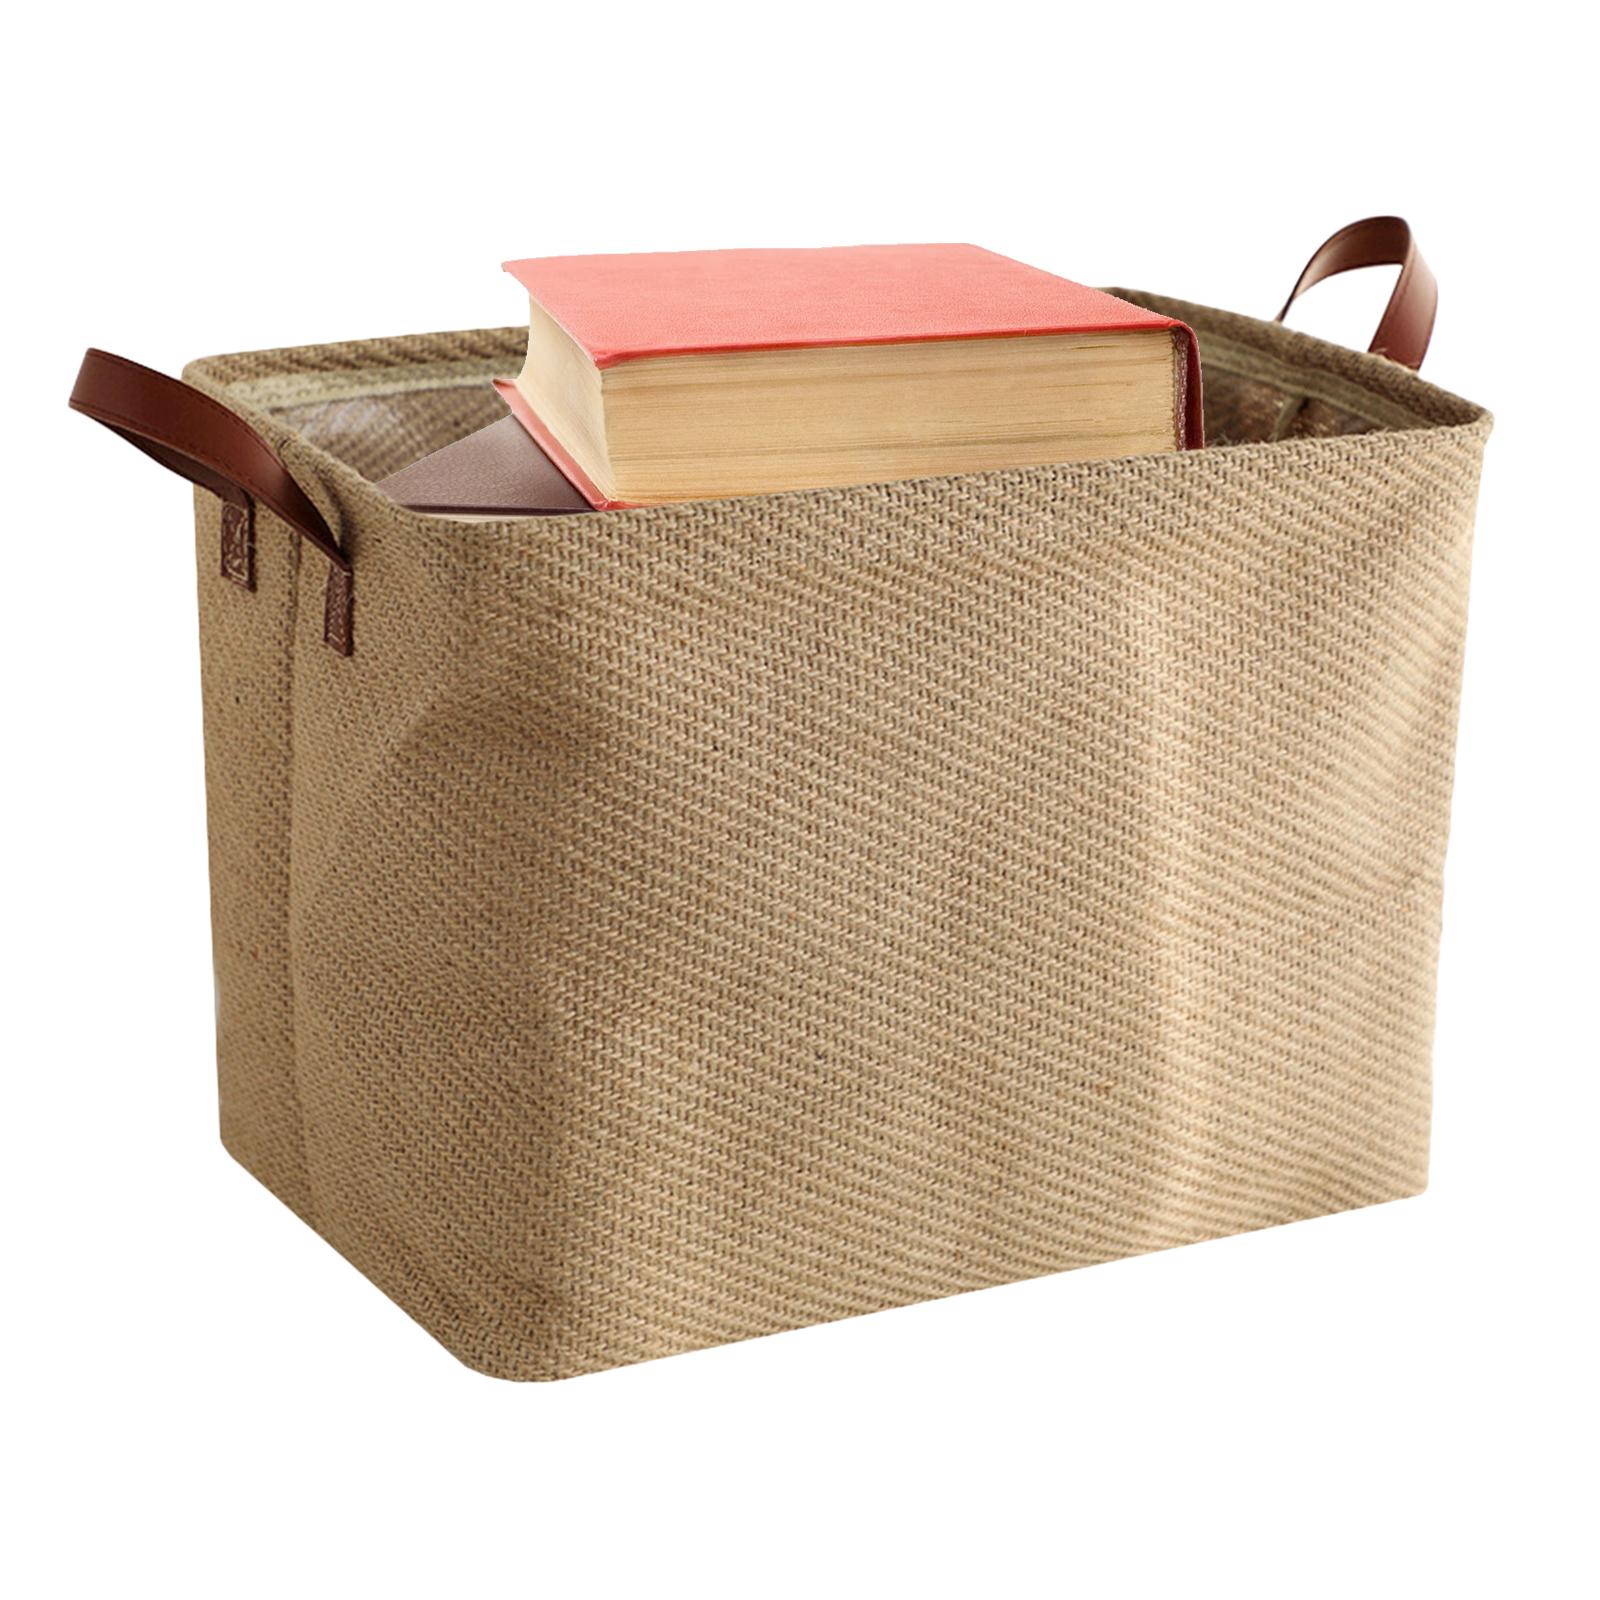 Foldable Storage Basket with Handles for Clothes Towels Laundry Storage Bin Plain Weave